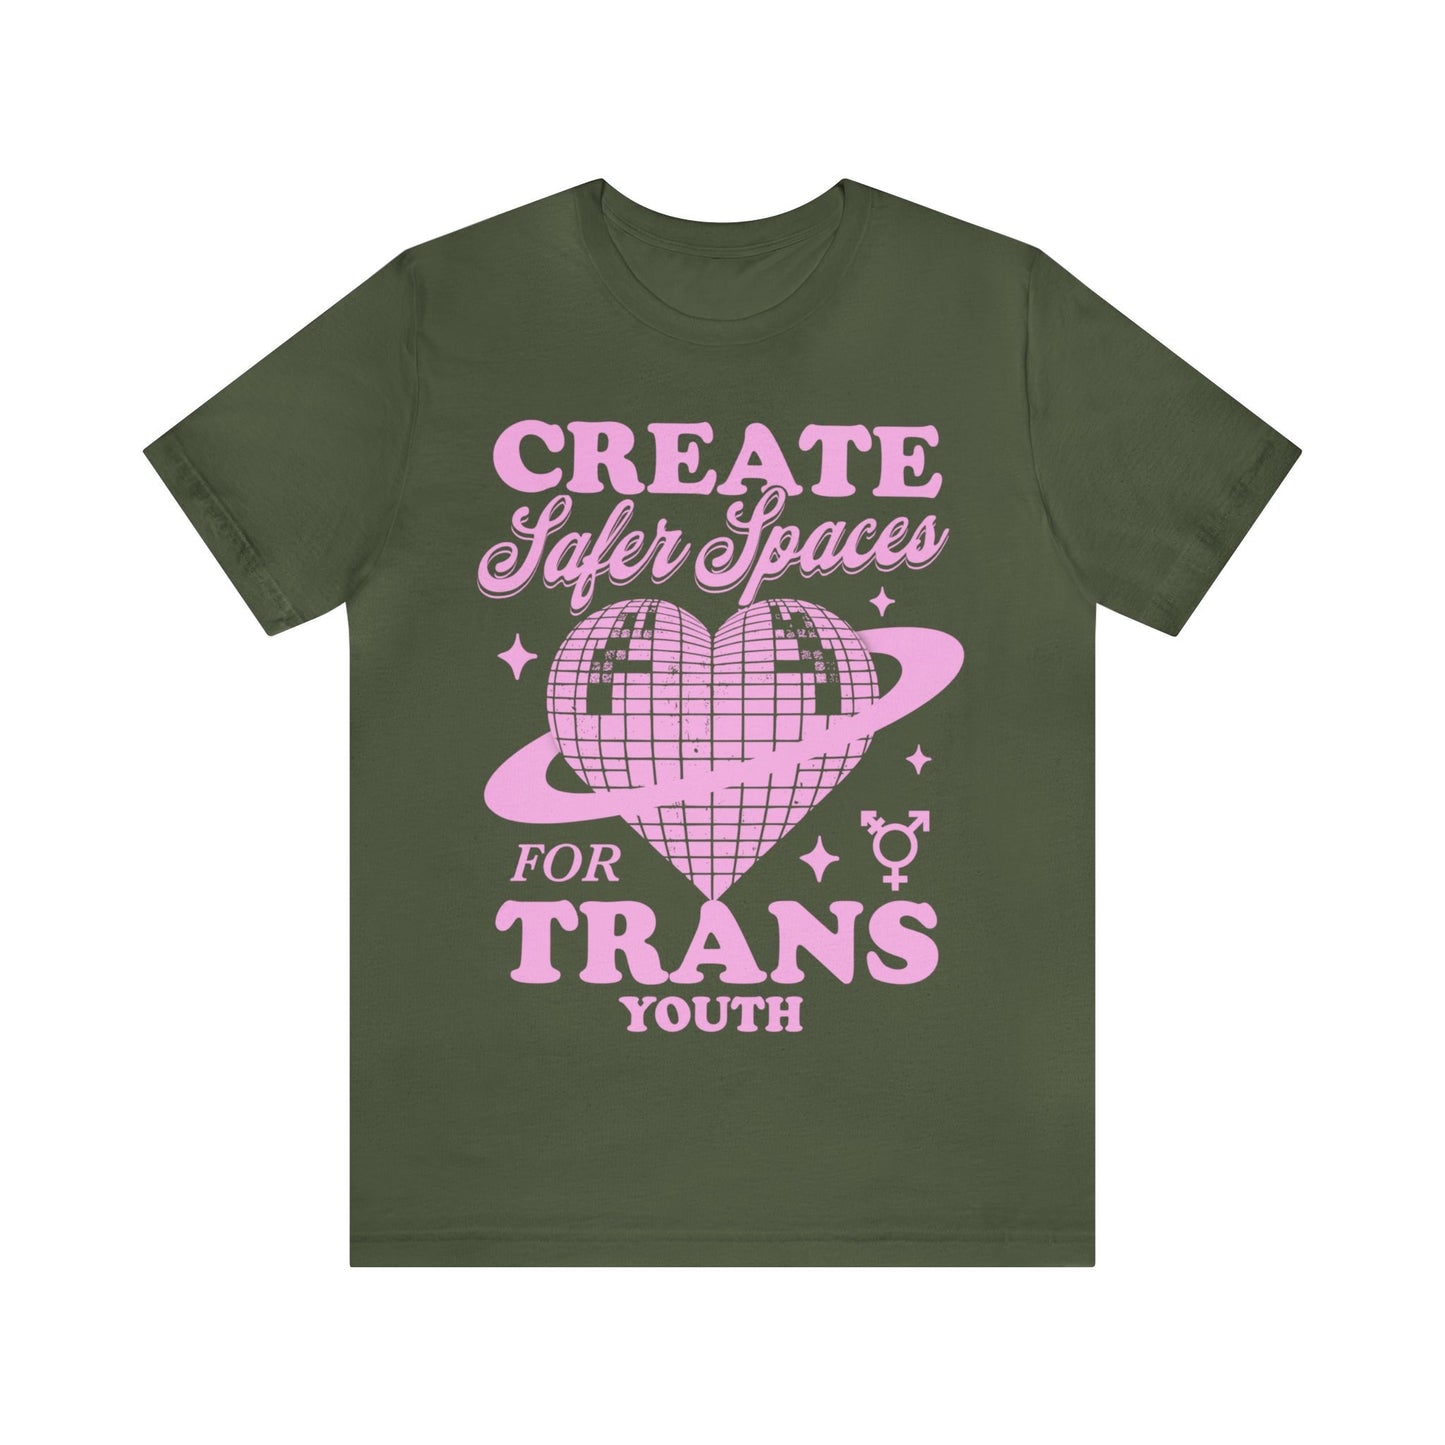 Create safer spaces for trans youth shirt